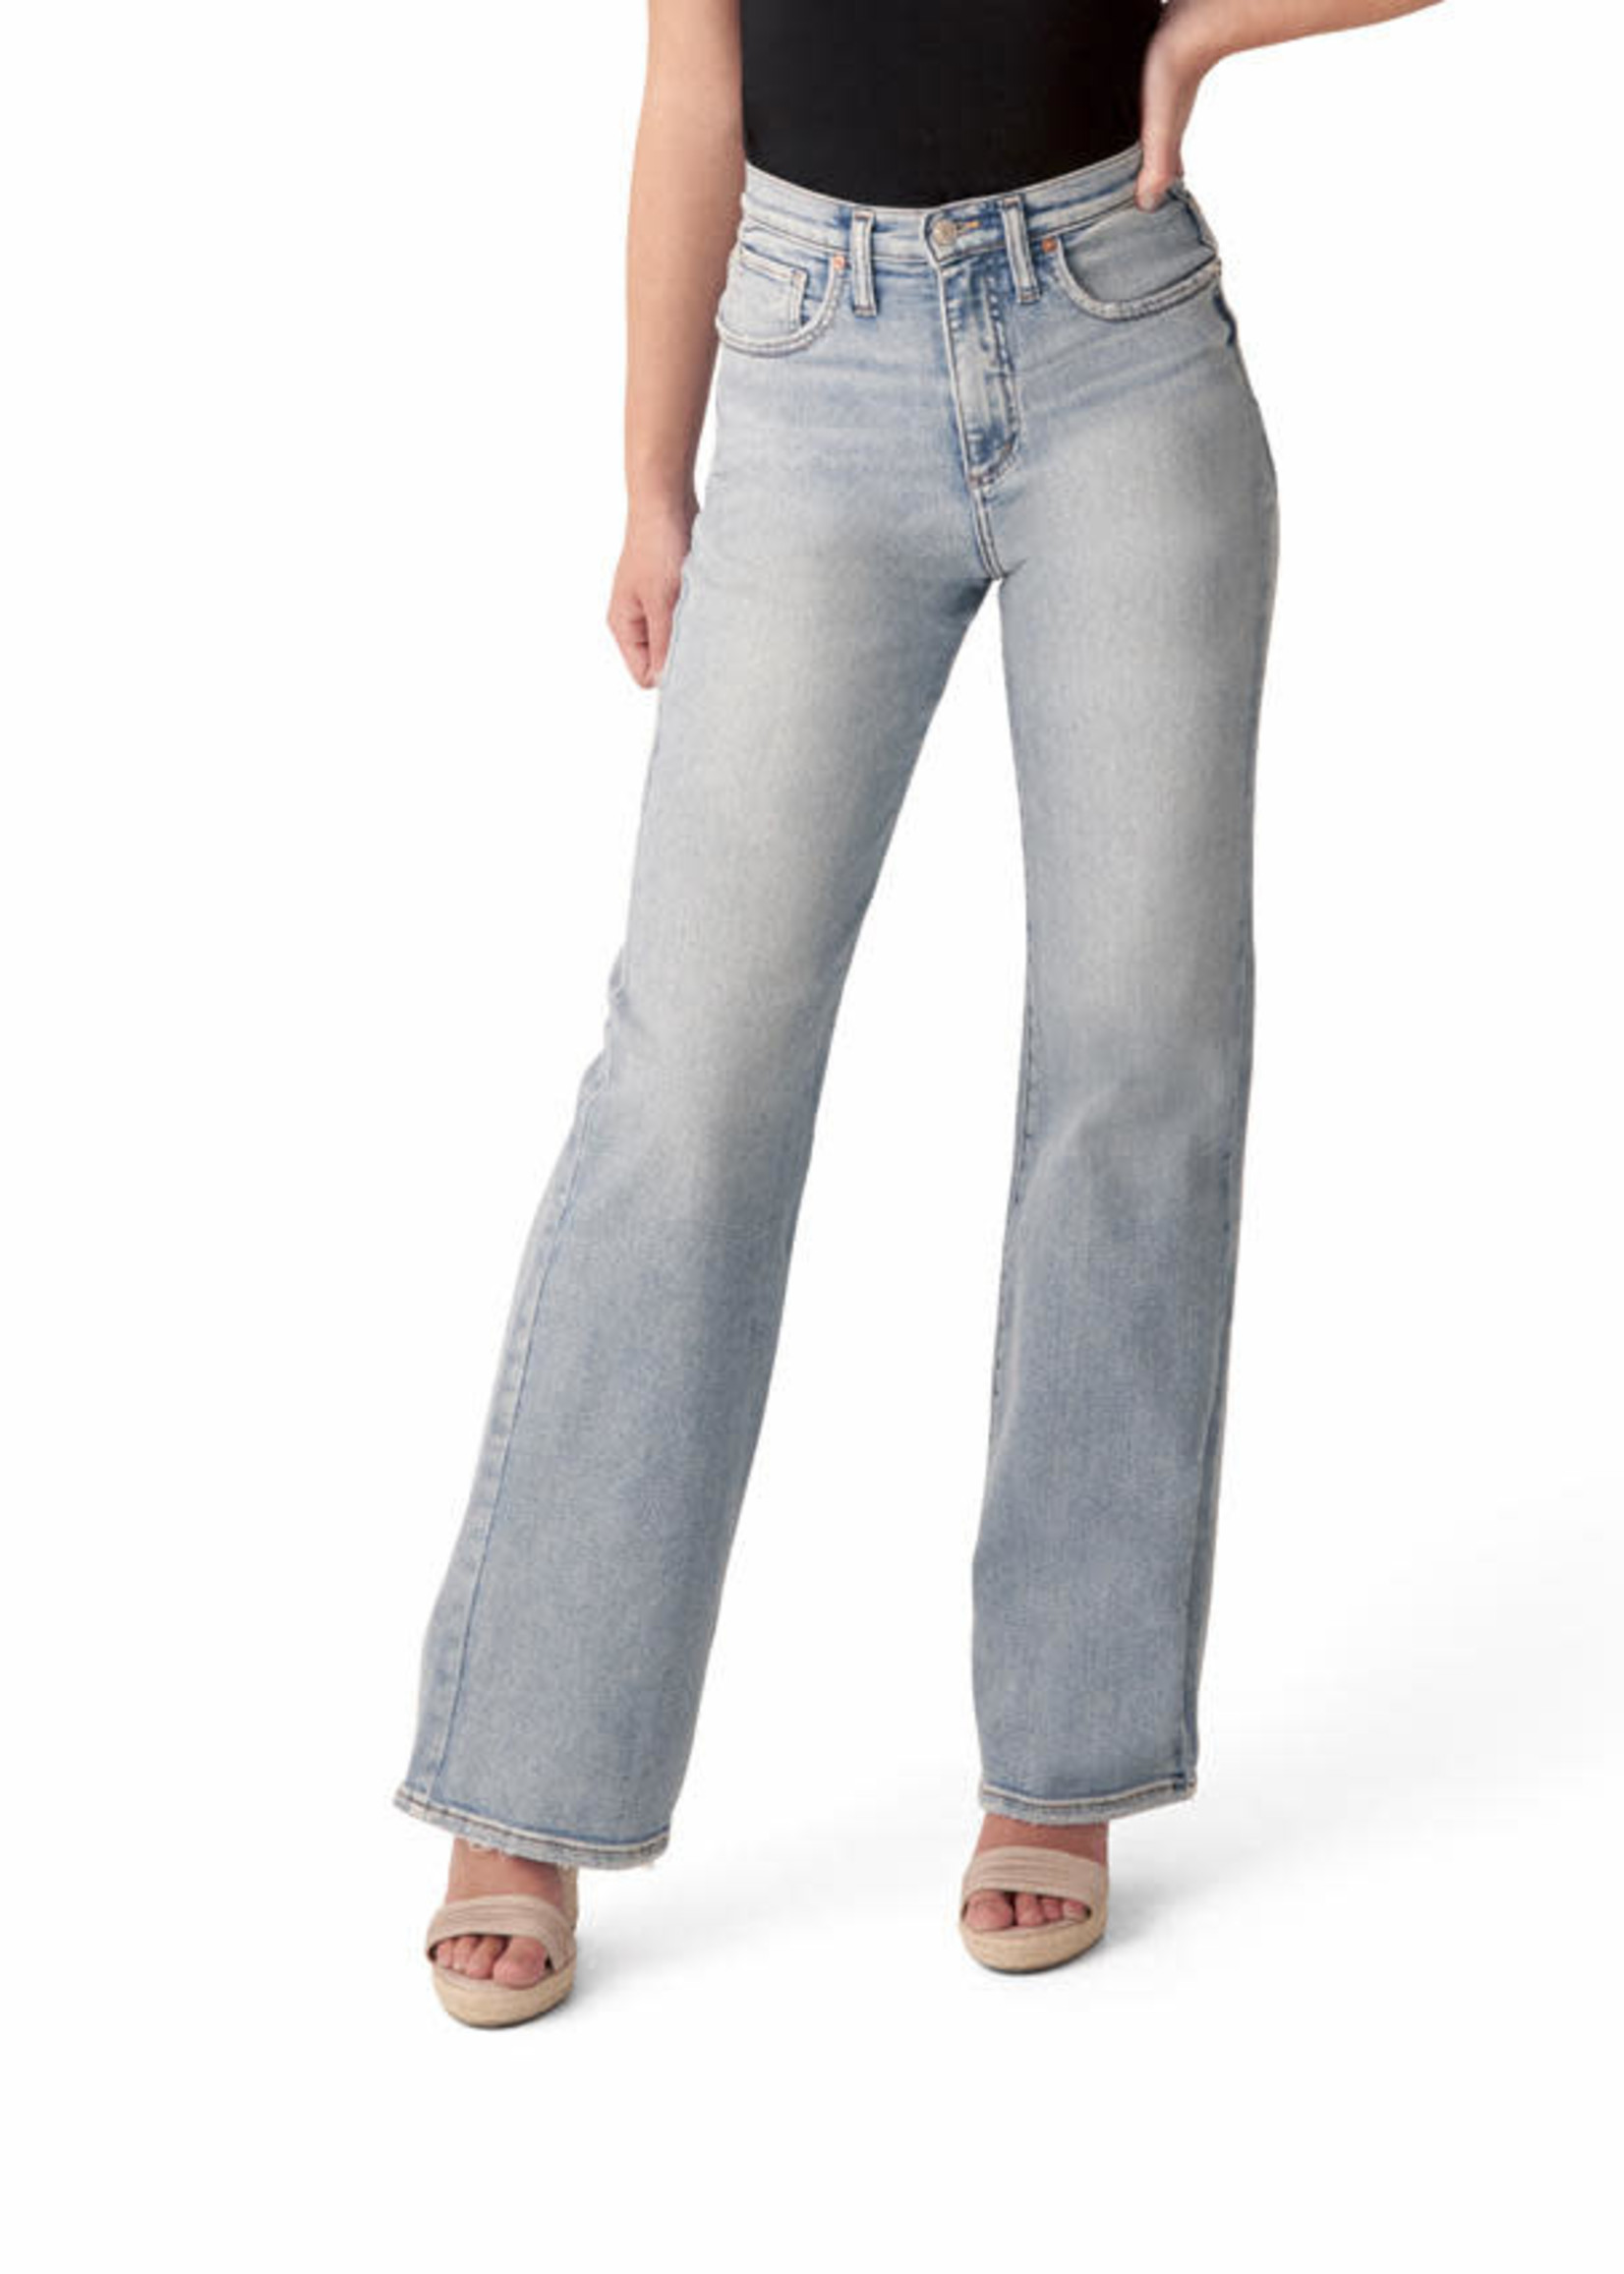 Silver Jeans Highly Desirable Trouser